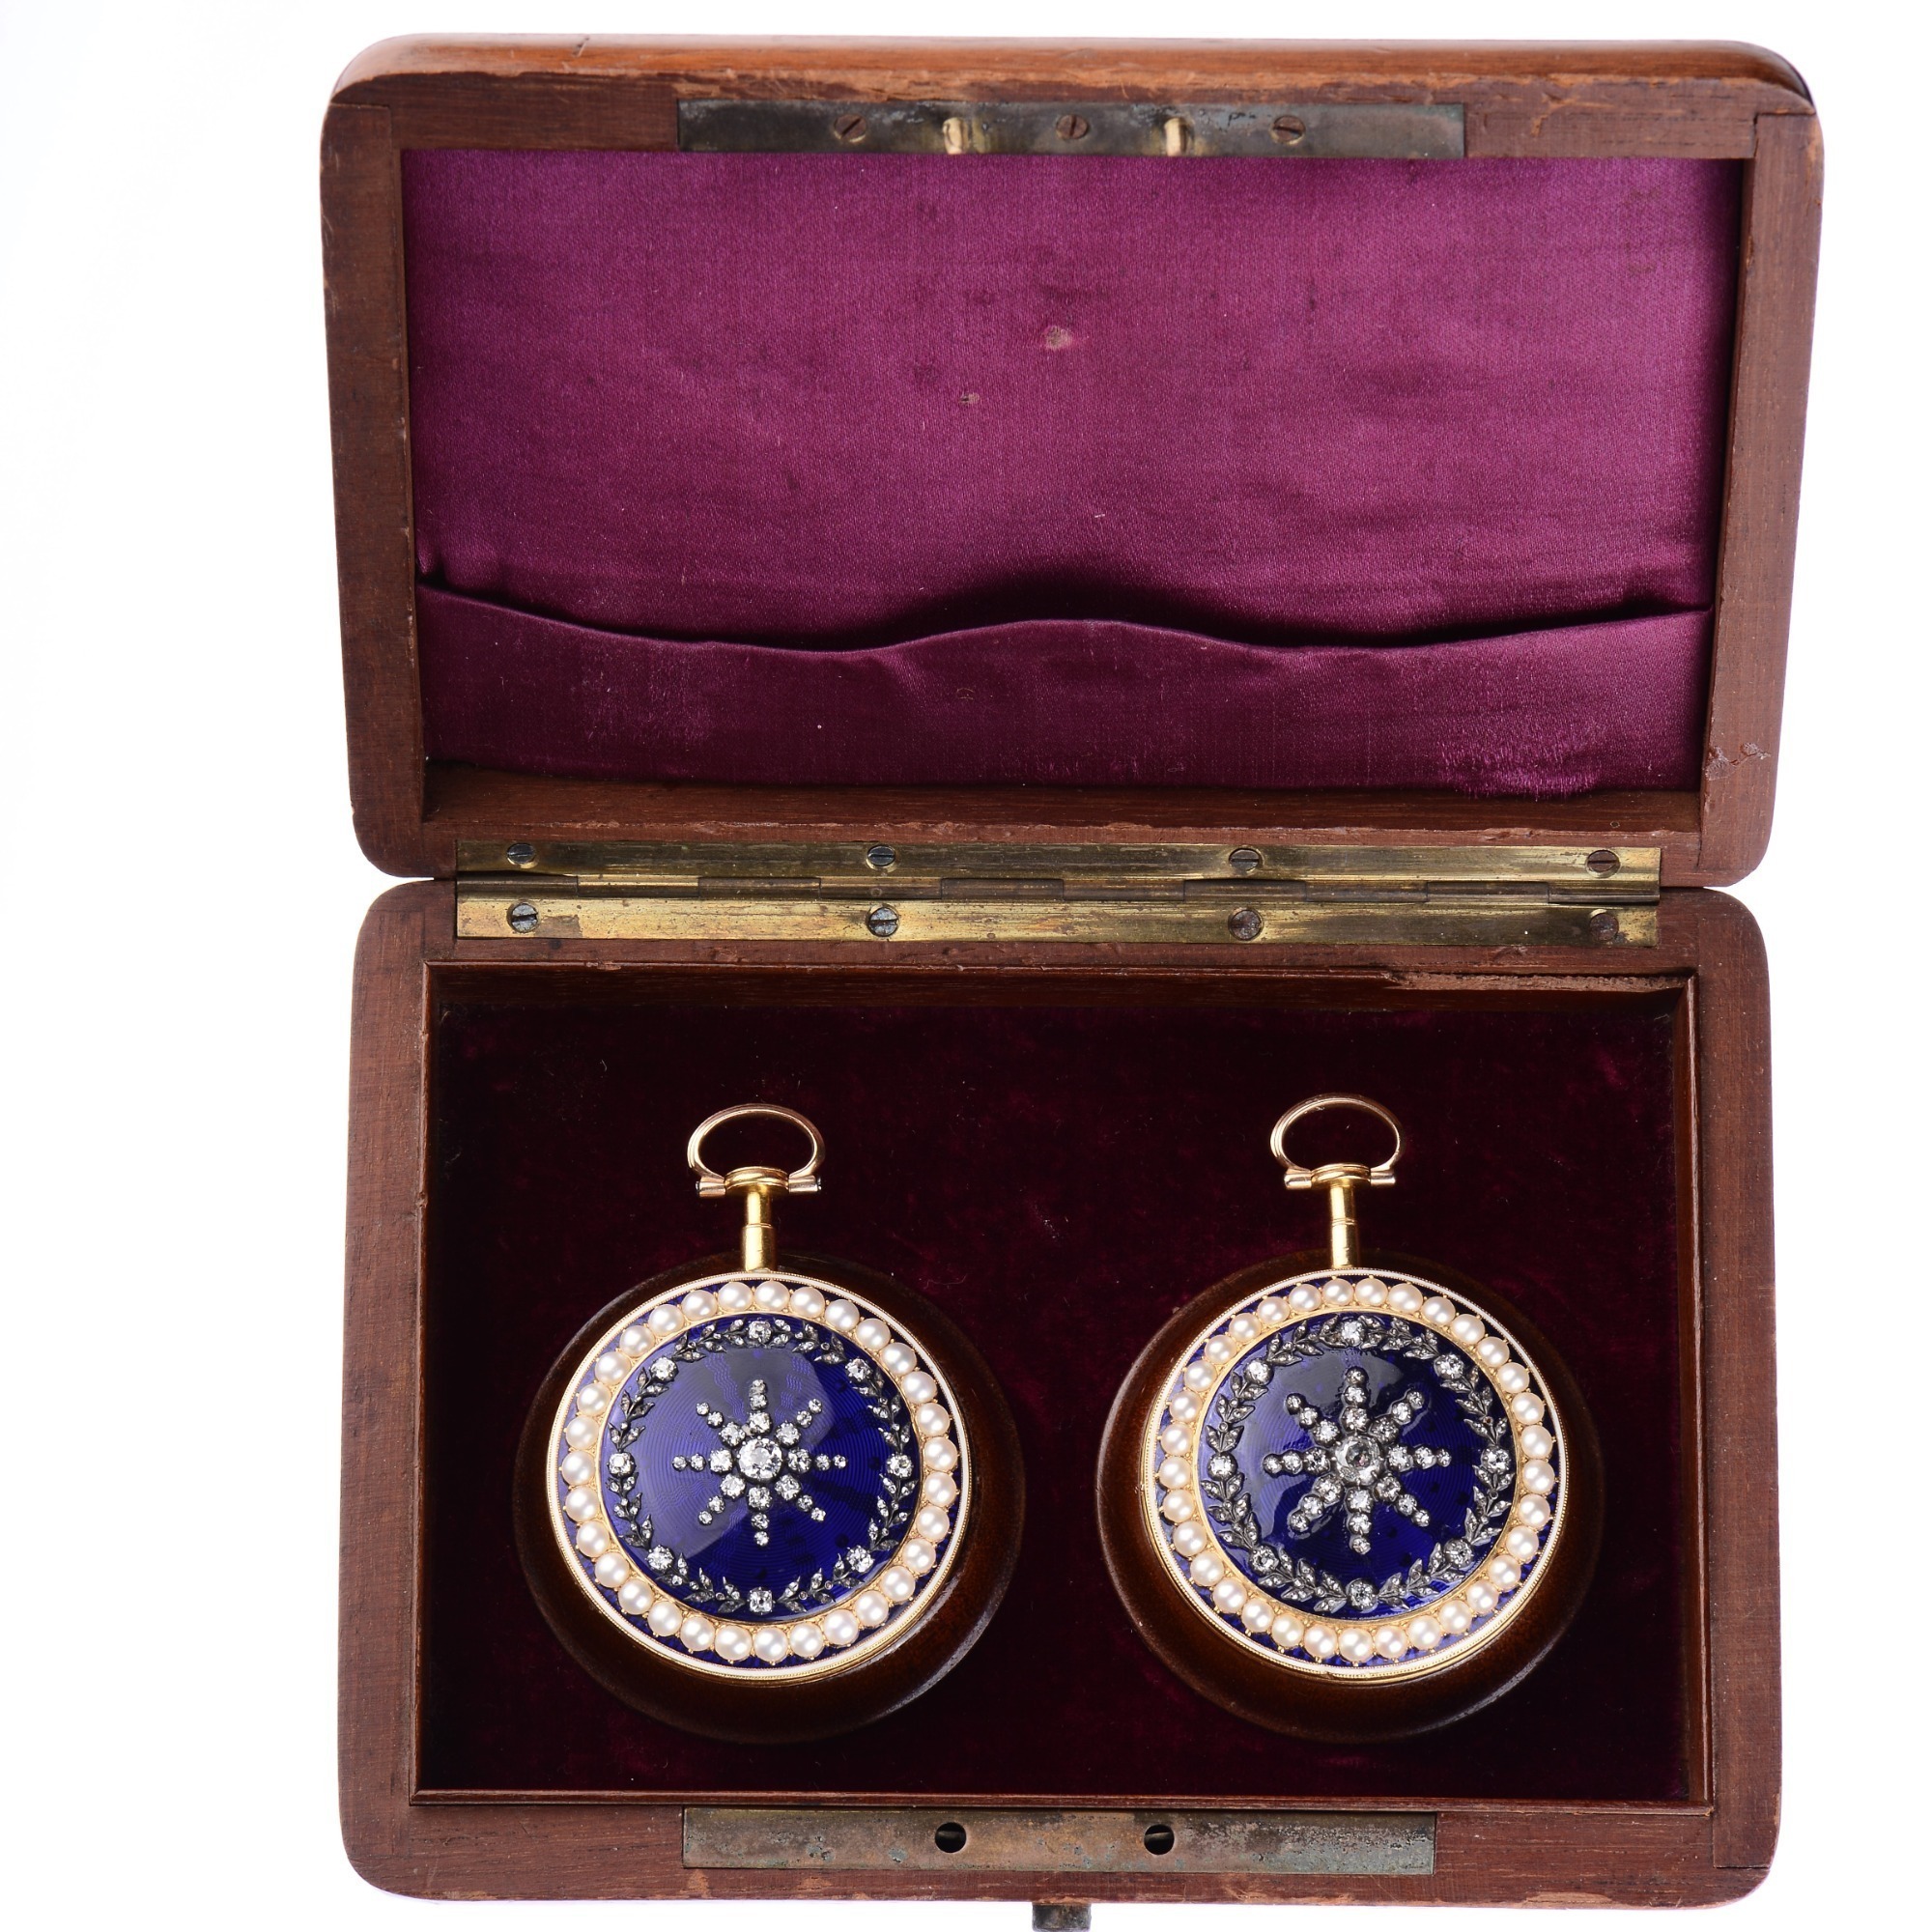 Matched Pair Of Gold, Diamond, Enamel And Pearl Fusee Watches By Thomas Gray, Sackville Street, London